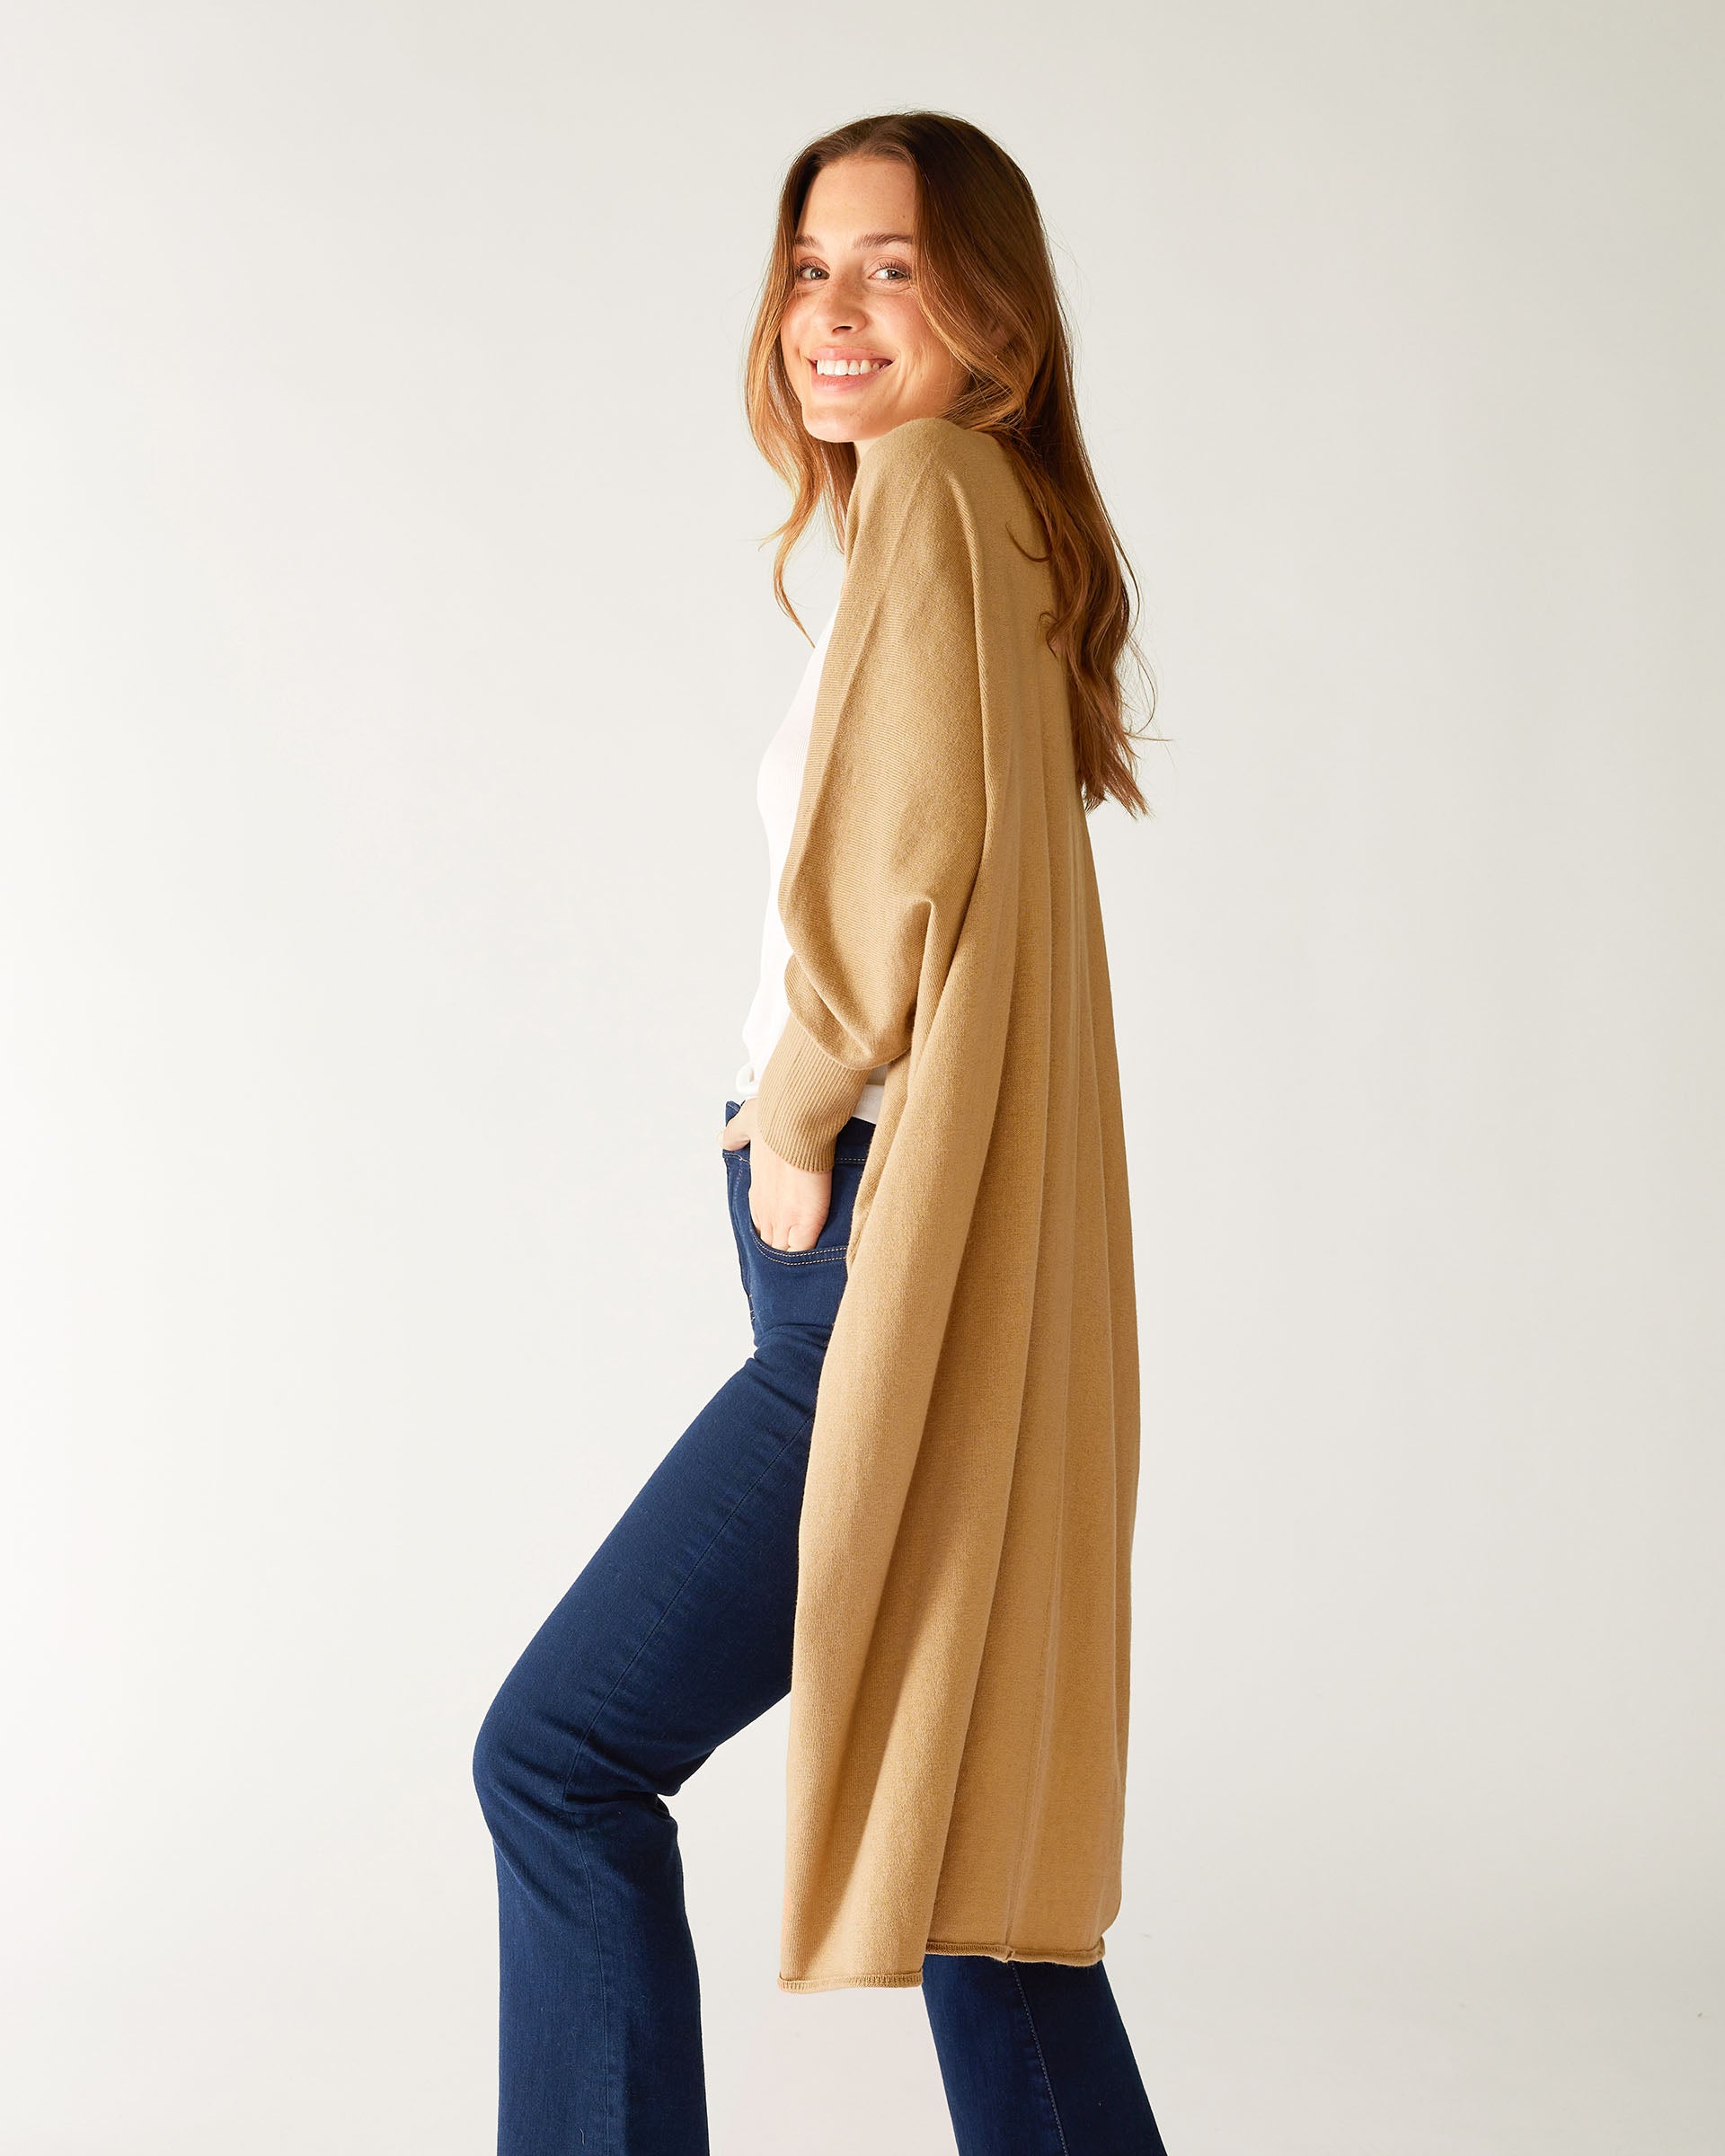 profile of woman wearing camel colored mersea long kimono sweater in cotton cashmere blend knit